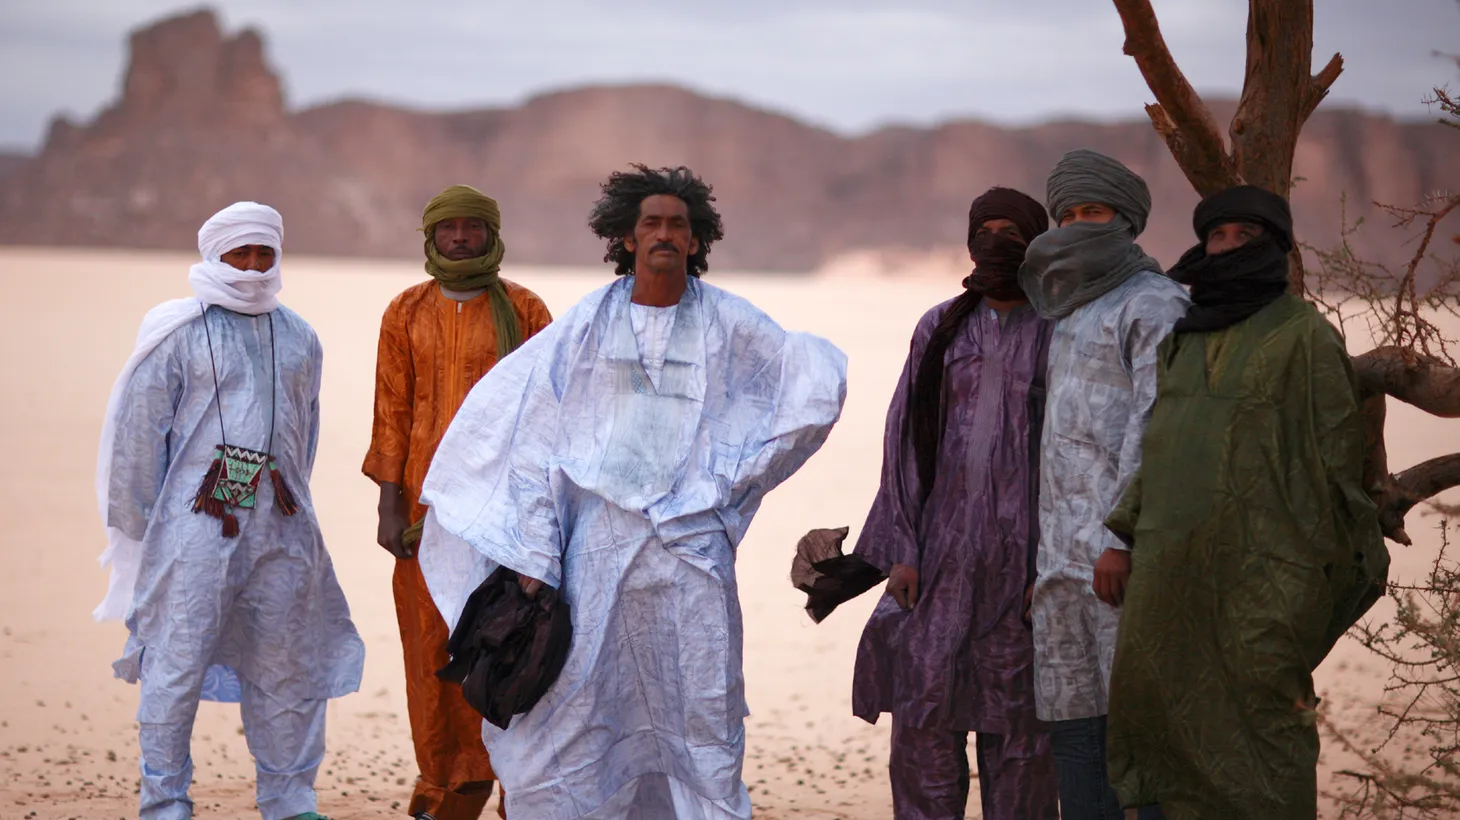 The word Tinariwen means desert and it is the name taken by a phenomenal collective of musicians from the Sahara playing what is best called "desert blues..."